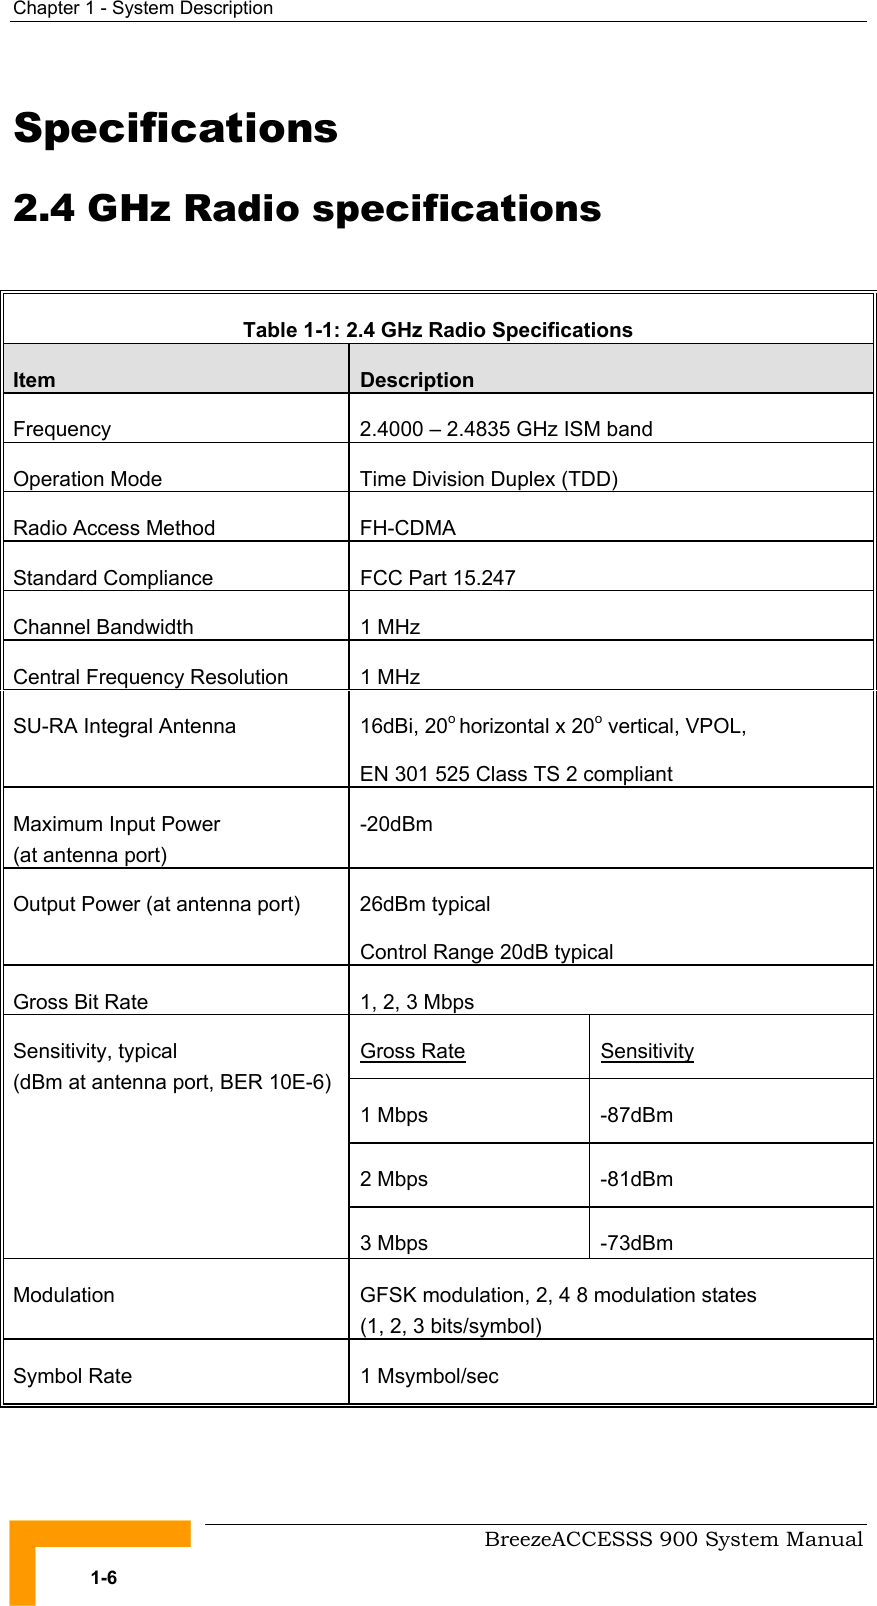 Chapter 1 - System Description   Specifications 2.4 GHz Radio specifications  Table 1-1: 2.4 GHz Radio Specifications Item  Description Frequency  2.4000 – 2.4835 GHz ISM band Operation Mode  Time Division Duplex (TDD) Radio Access Method  FH-CDMA Standard Compliance  FCC Part 15.247 Channel Bandwidth  1 MHz Central Frequency Resolution  1 MHz SU-RA Integral Antenna  16dBi, 20o horizontal x 20o vertical, VPOL,  EN 301 525 Class TS 2 compliant Maximum Input Power  (at antenna port) -20dBm  Output Power (at antenna port)  26dBm typical Control Range 20dB typical Gross Bit Rate  1, 2, 3 Mbps Gross Rate Sensitivity 1 Mbps  -87dBm 2 Mbps  -81dBm Sensitivity, typical  (dBm at antenna port, BER 10E-6) 3 Mbps  -73dBm Modulation  GFSK modulation, 2, 4 8 modulation states  (1, 2, 3 bits/symbol) Symbol Rate  1 Msymbol/sec   BreezeACCESSS 900 System Manual 1-6 